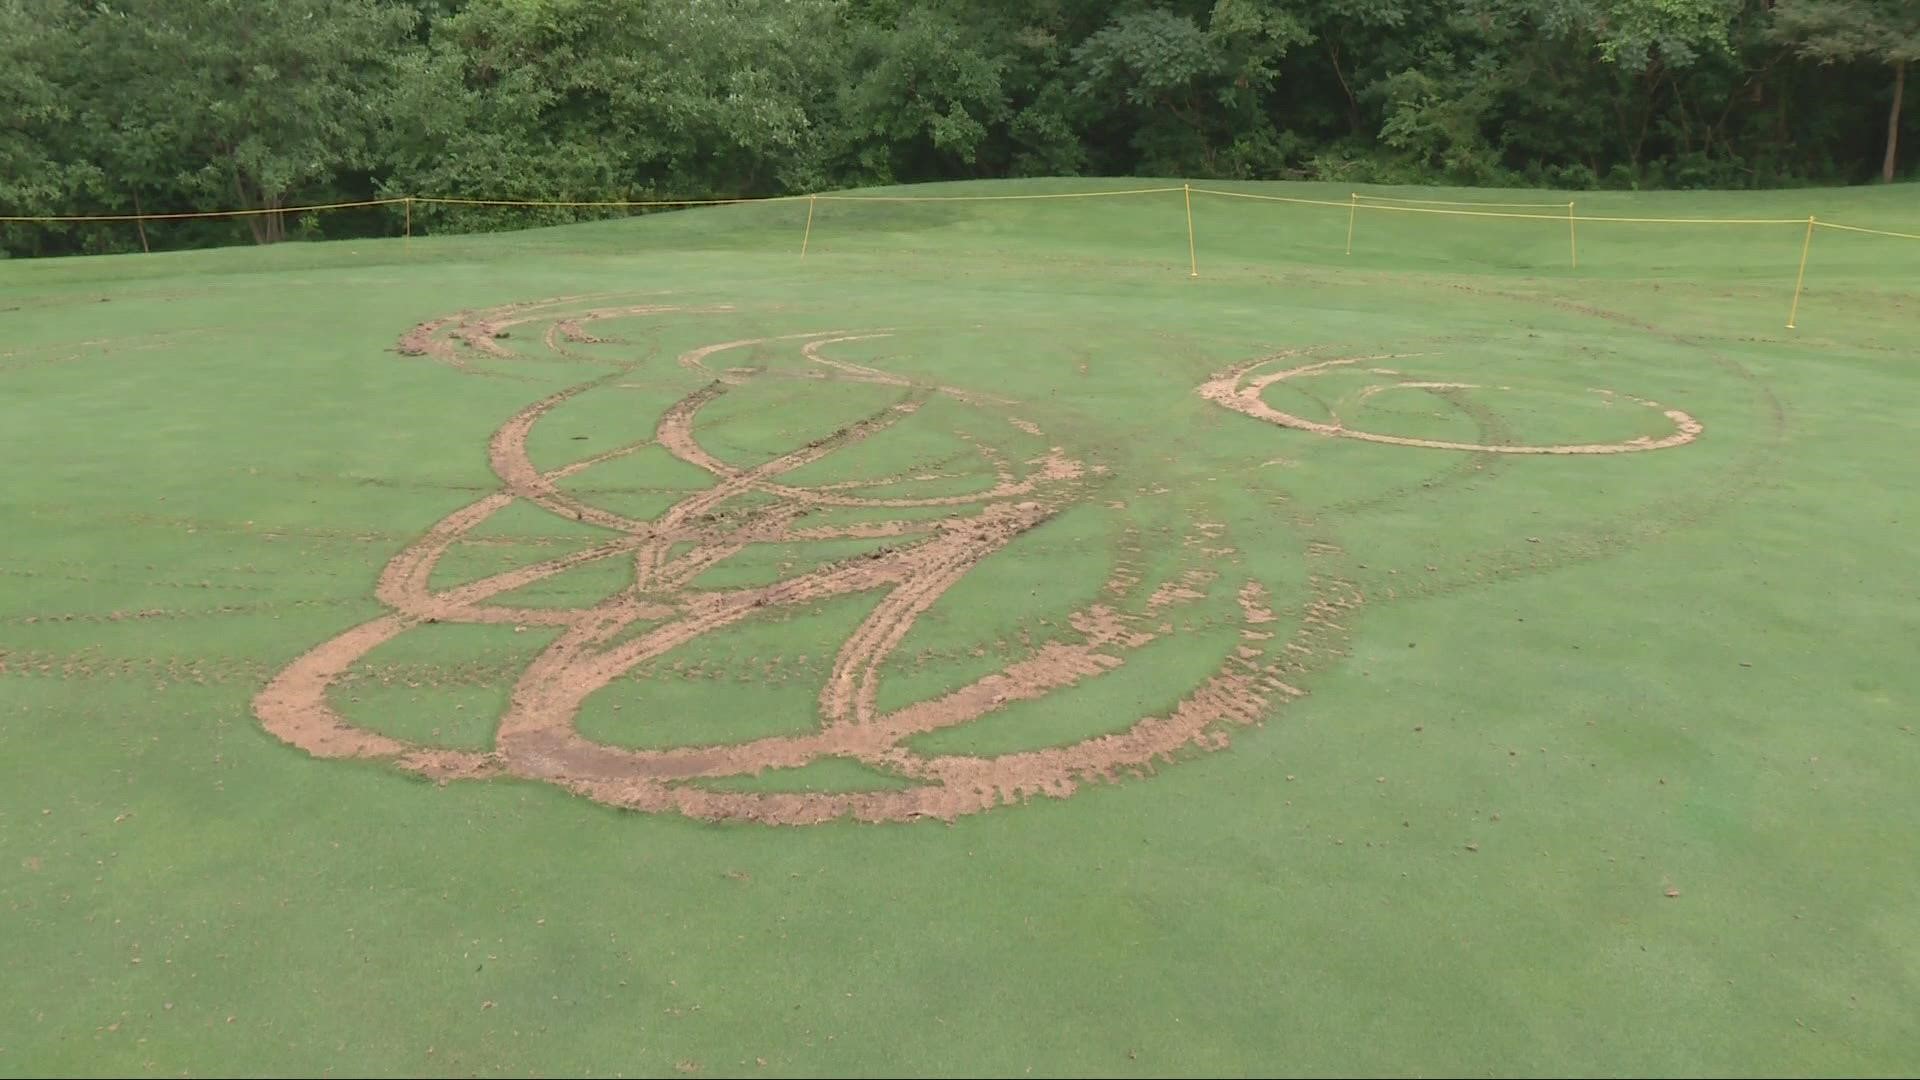 Officials say someone drove a four-wheeler onto the course and did donuts on the green, making the hole unplayable.